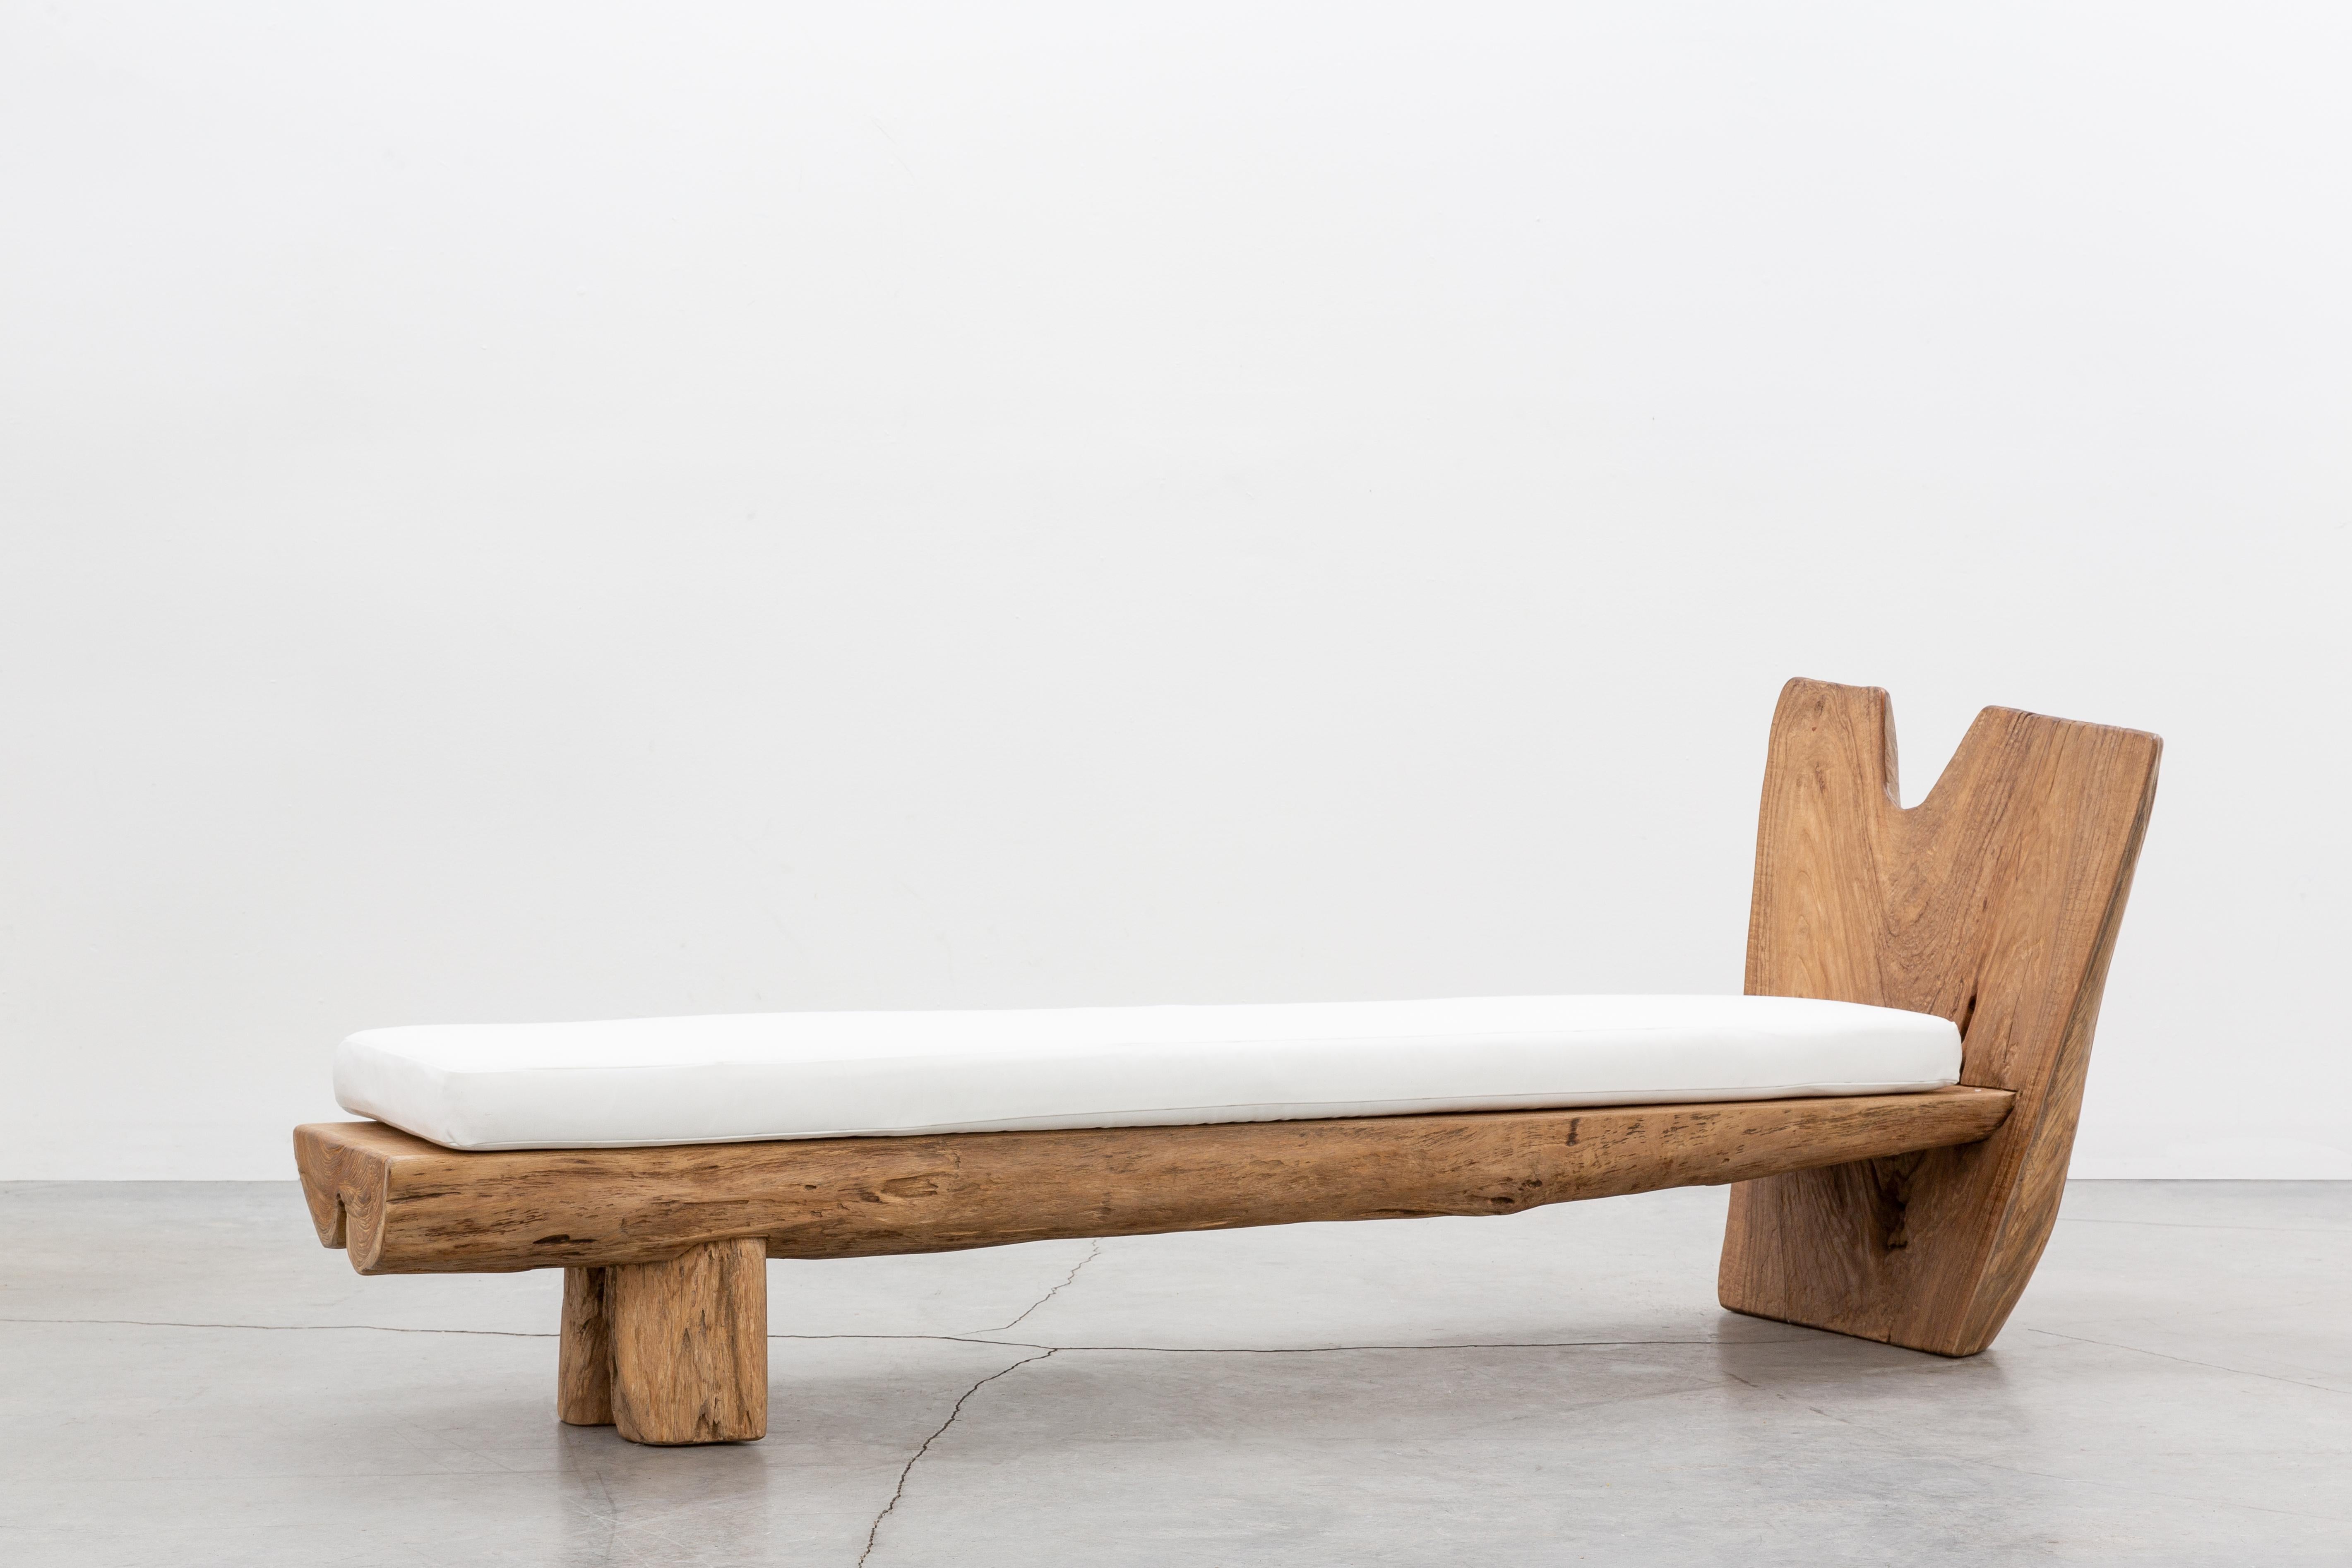 Lakkar Chaise by CEU

Organic shaped slabs of wood are carefully assembled into a seemingly primitive day bed. Perfect for poolside or outdoor gardens, the Lakkar Chaise feels like a natural element of the landscape and ages beautifully with the